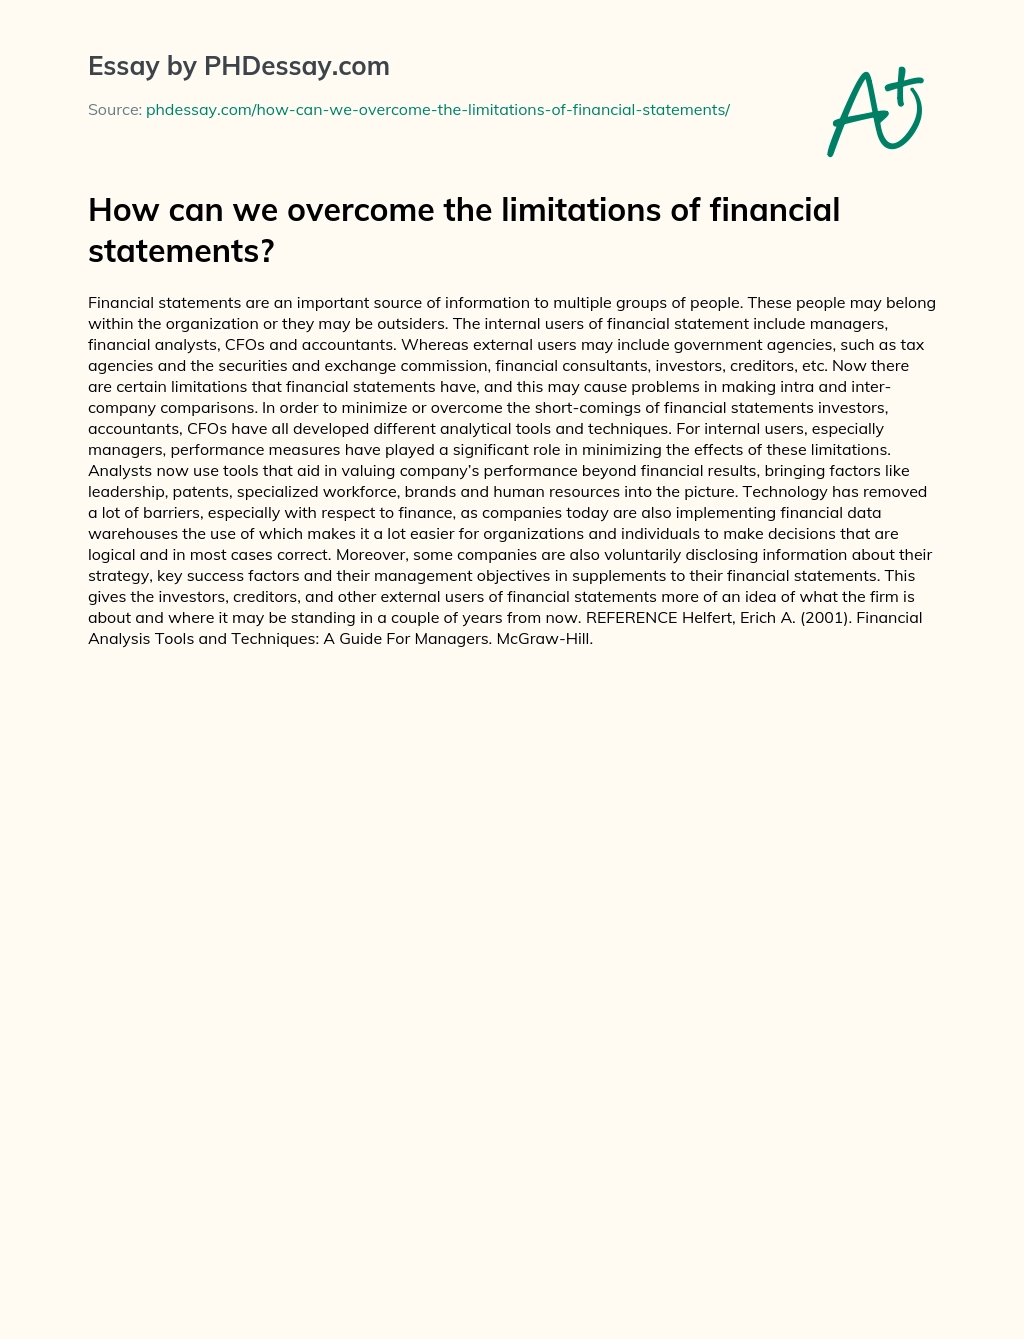 How can we overcome the limitations of financial statements? essay